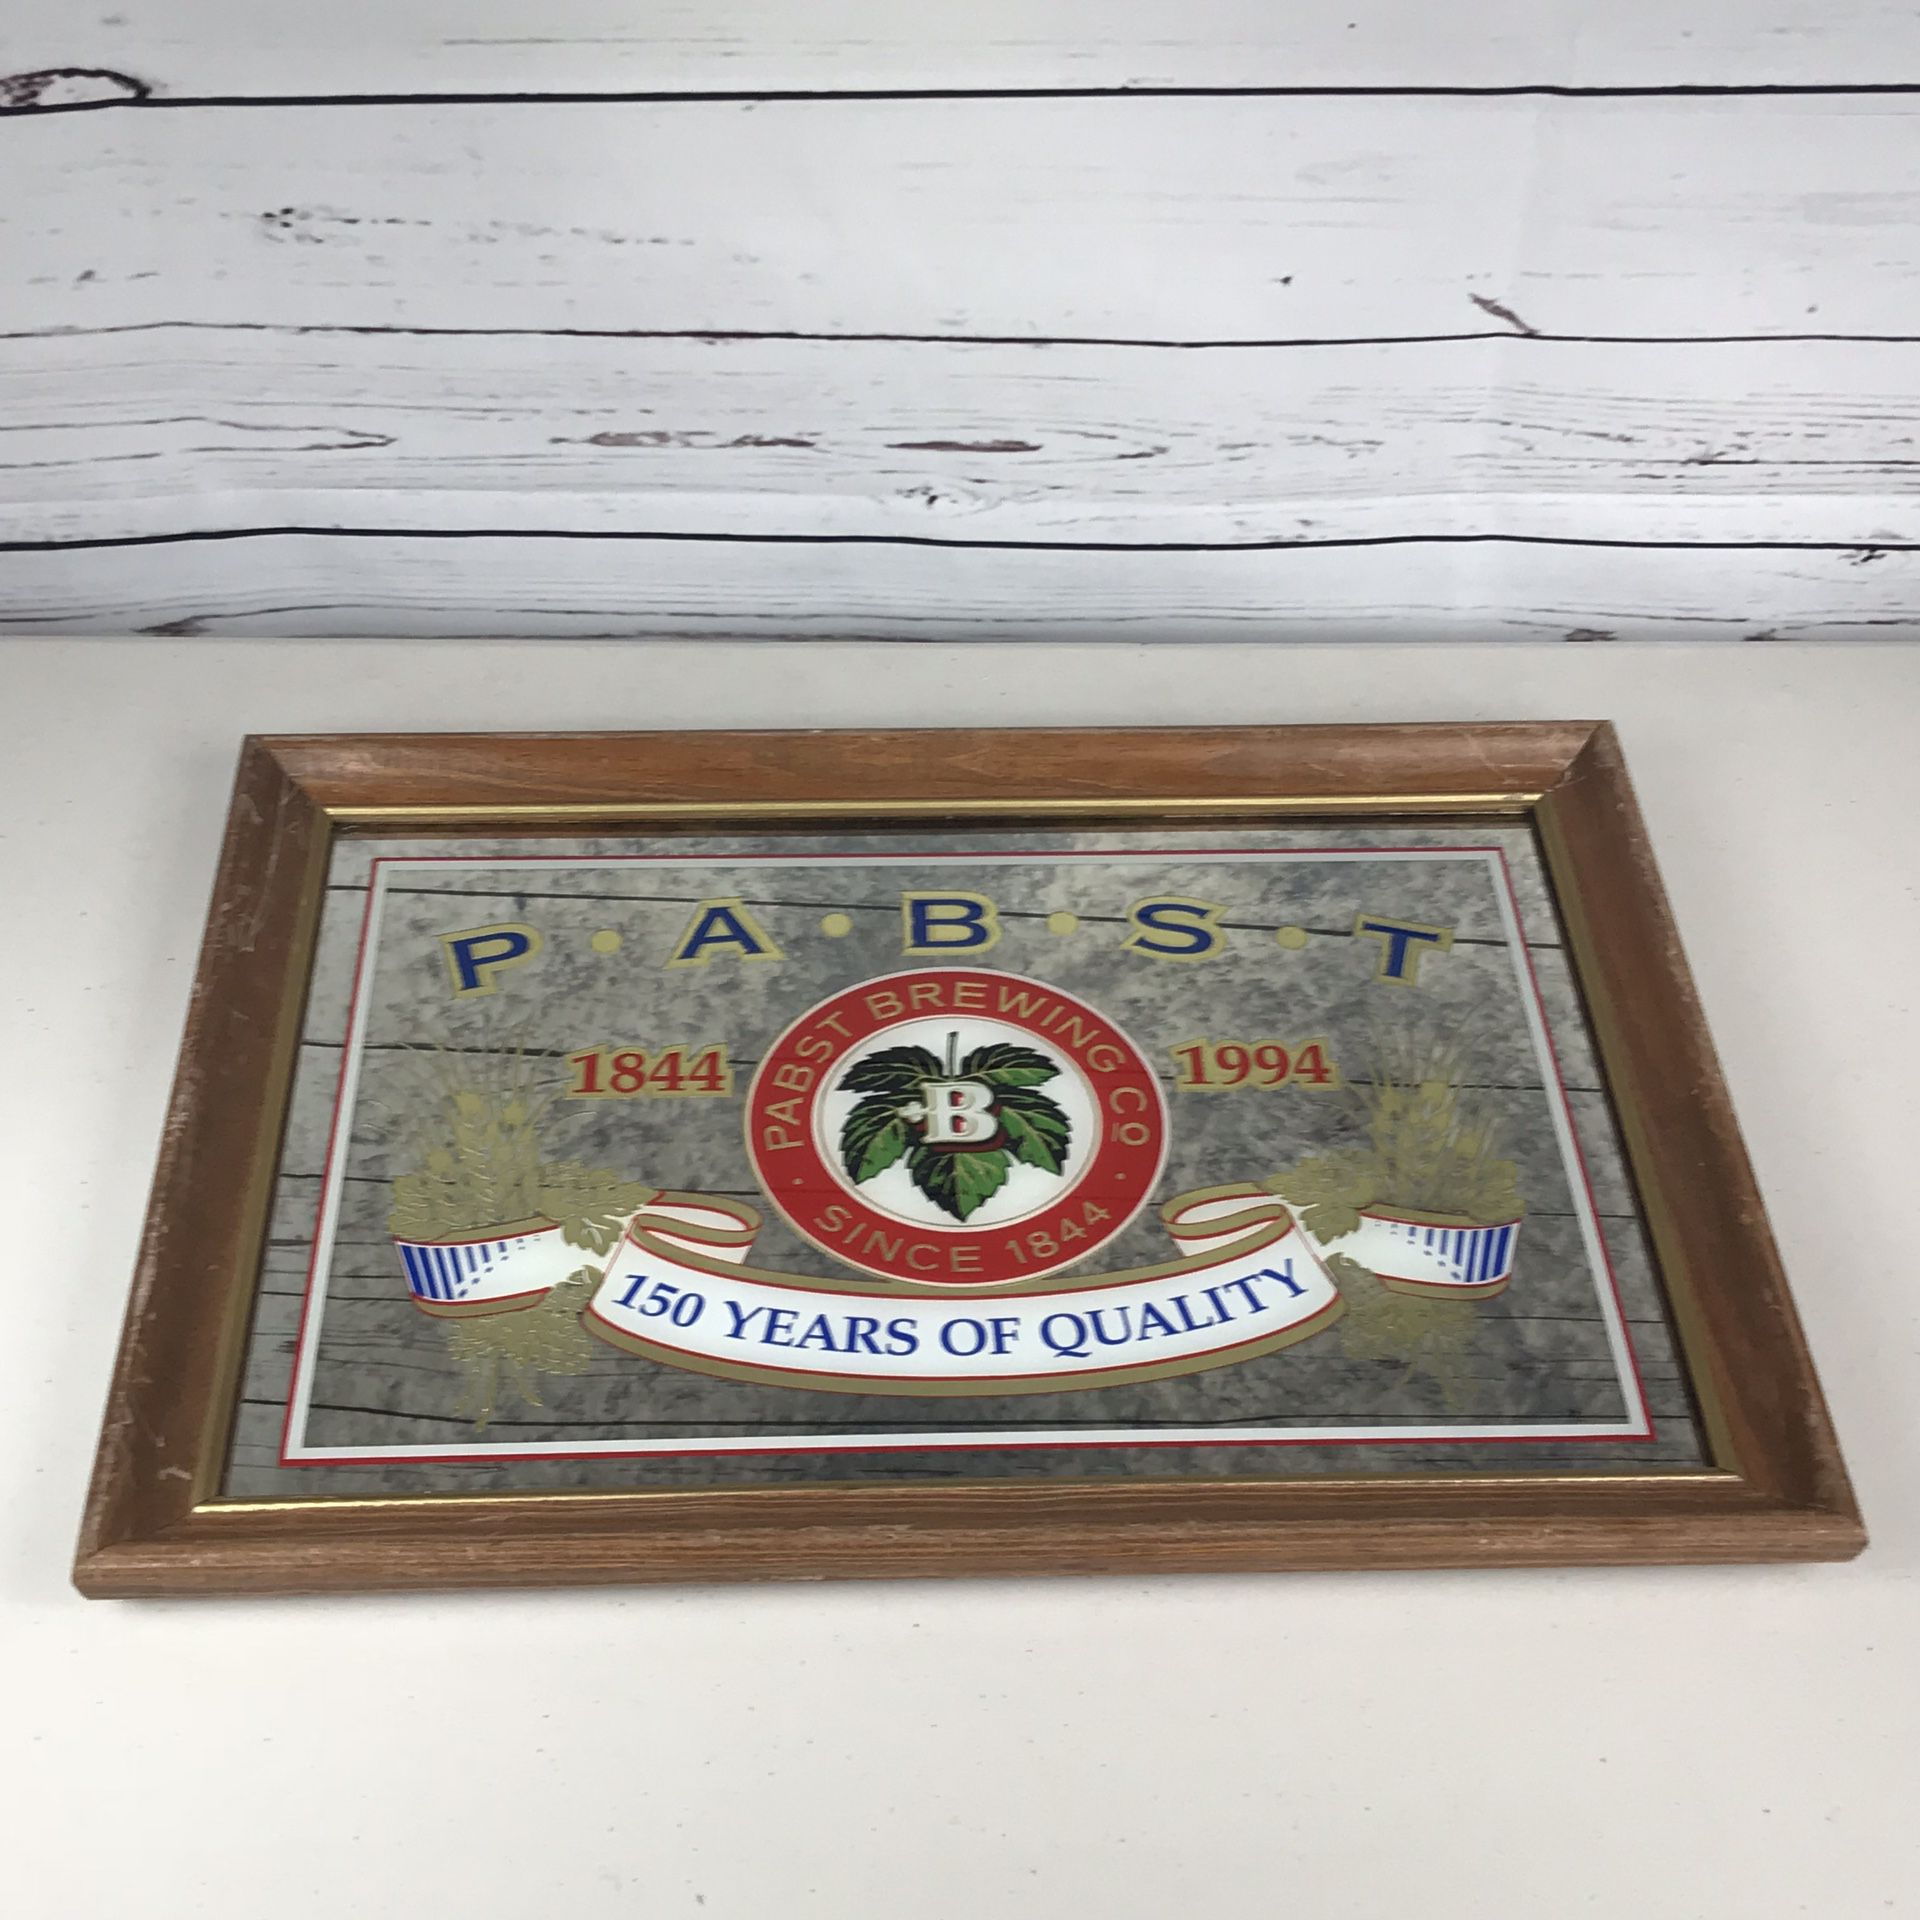 Pabst brewing 150 years of quality mirror sign 20 x 14”